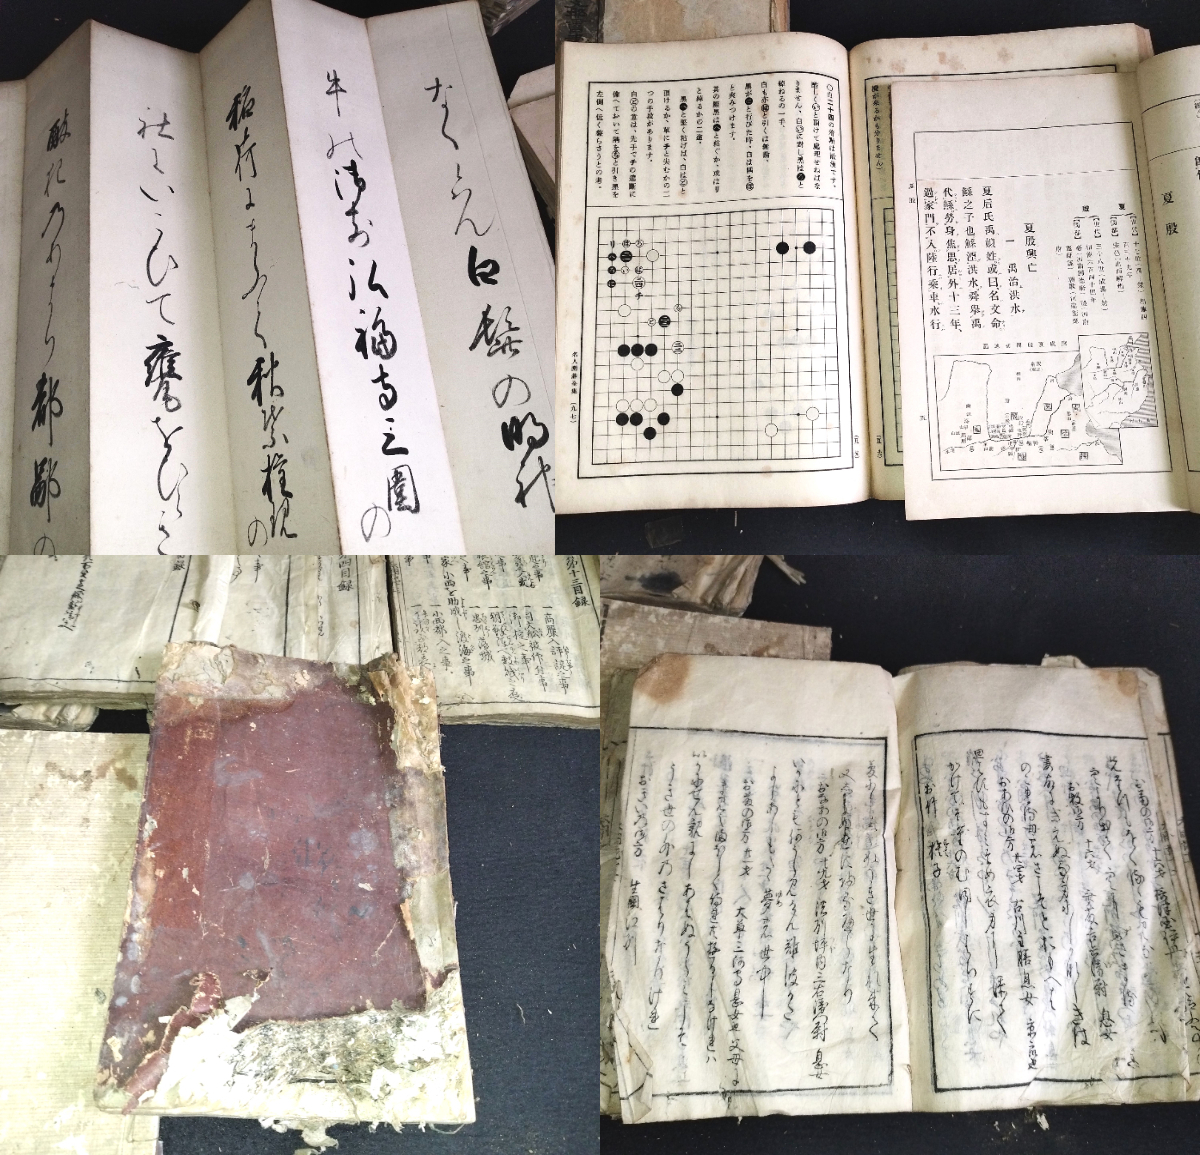 S091 80 pcs. and more [ peace book@ etc. summarize ].. thing hand book@ old map calligraphy . road another . entrance . autograph * tree version Edo Meiji era thing antique old fine art peace book@ old book 